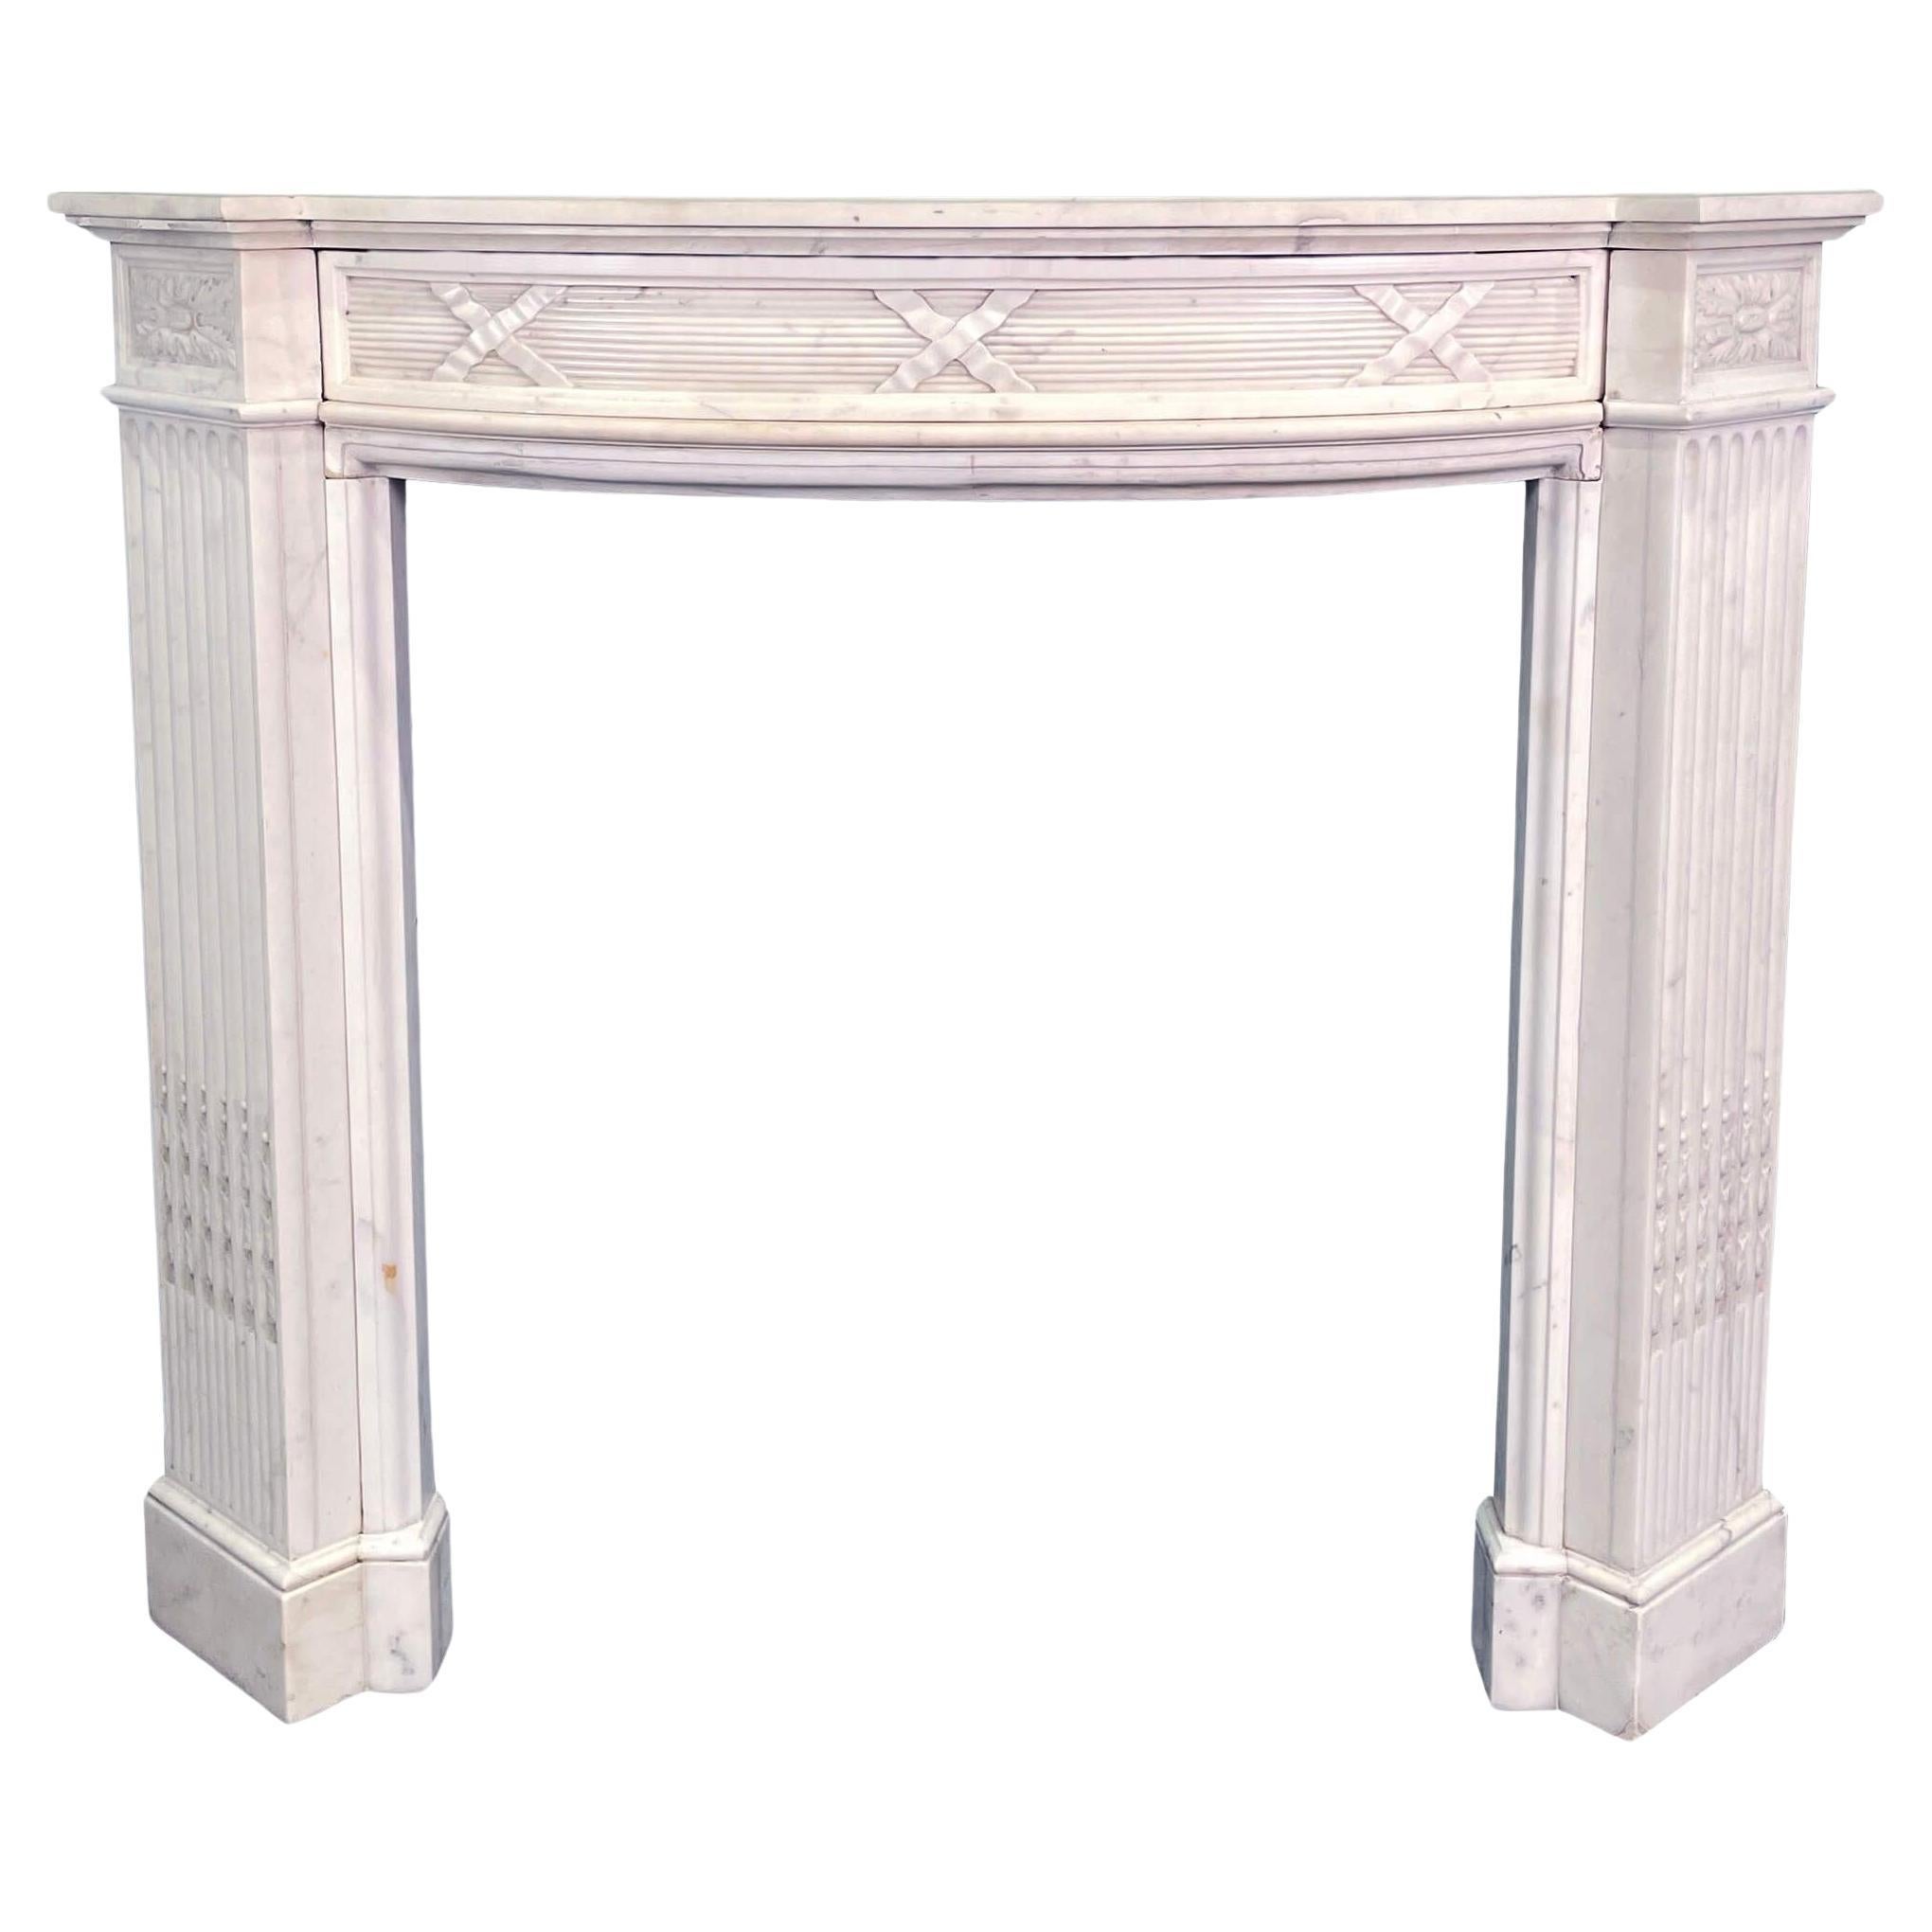 Bowfronted Antique White Marble Fire Mantel